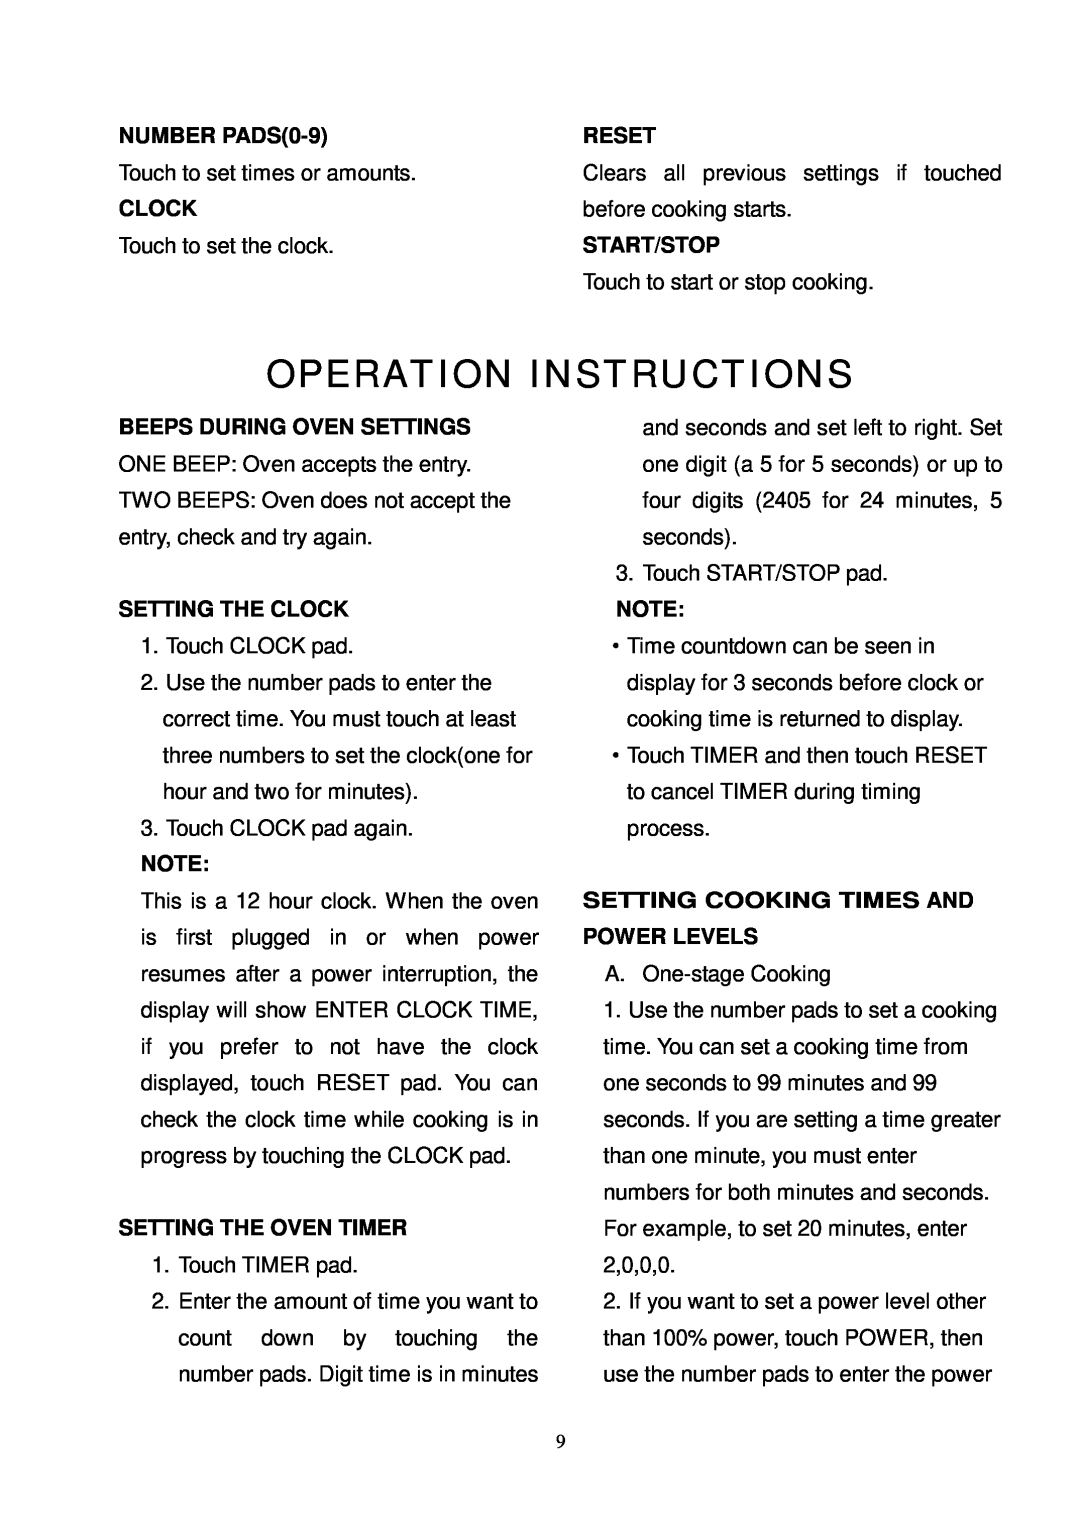 Kenmore 87000 user manual Operation Instructions, NUMBER PADS0-9, Clock, Reset, Start/Stop, Beeps During Oven Settings 